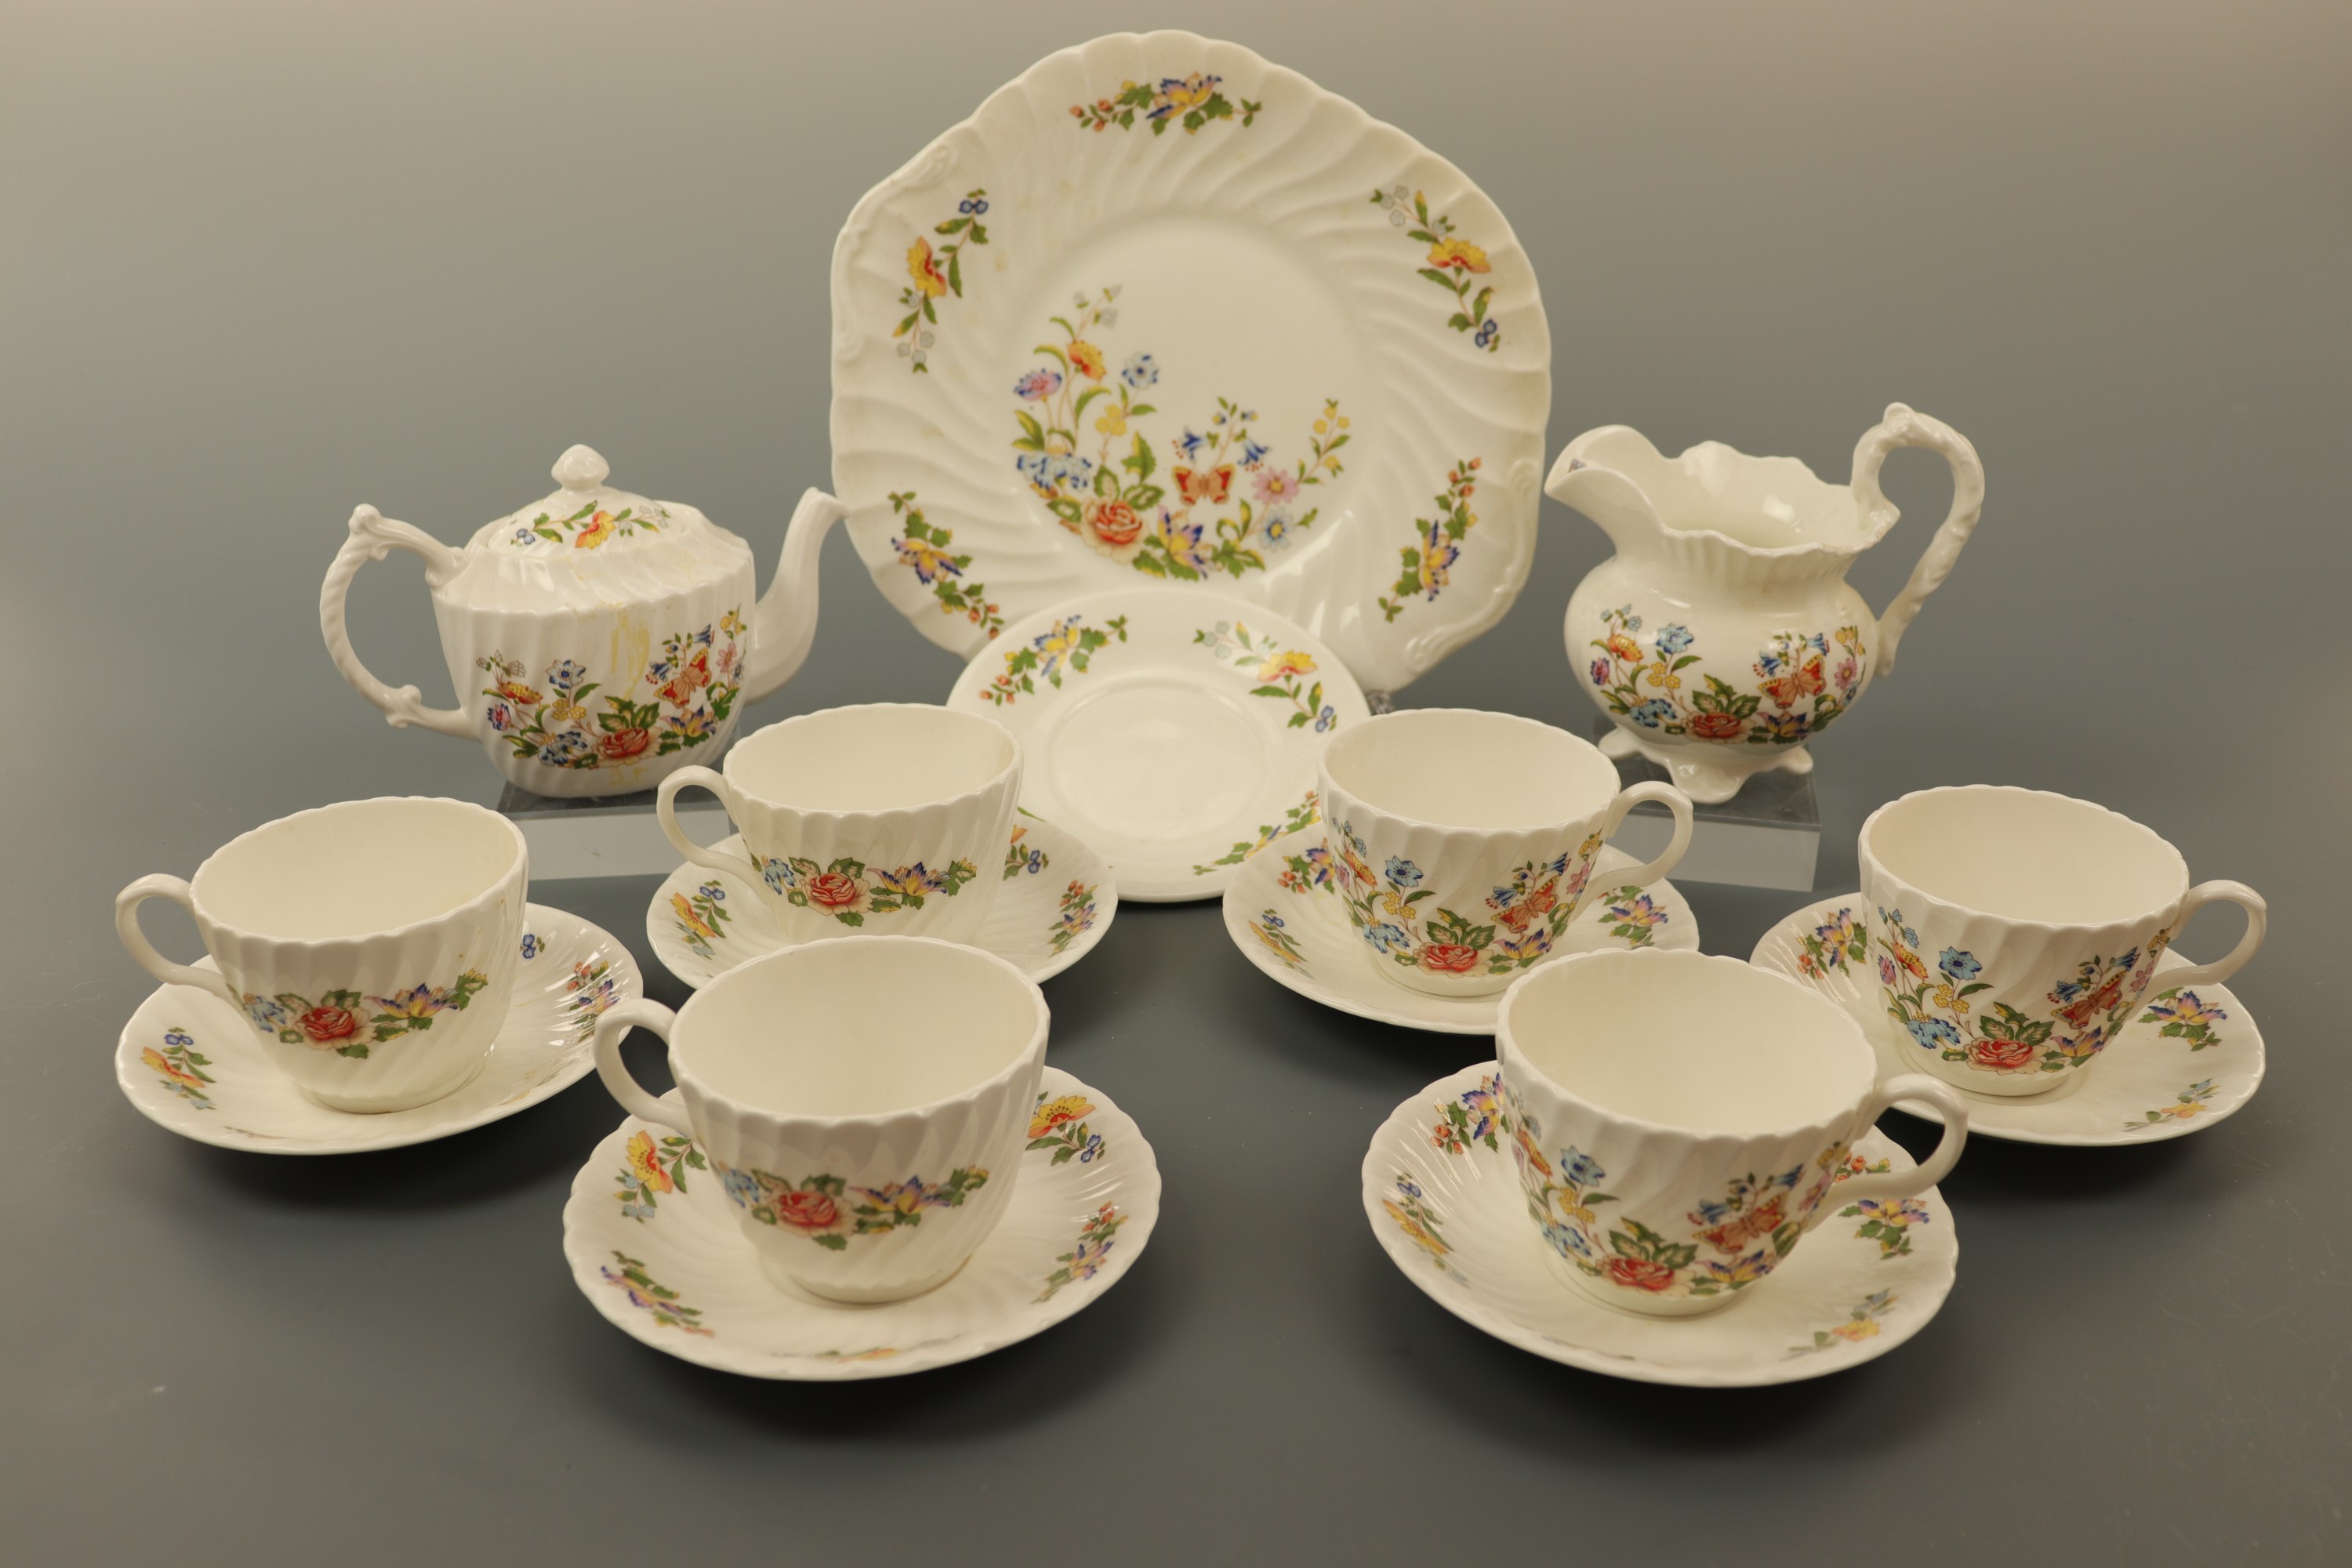 Aynsley "Cottage Garden" tea and dinnerware, approximately 40 items (free of damage) - Image 2 of 2